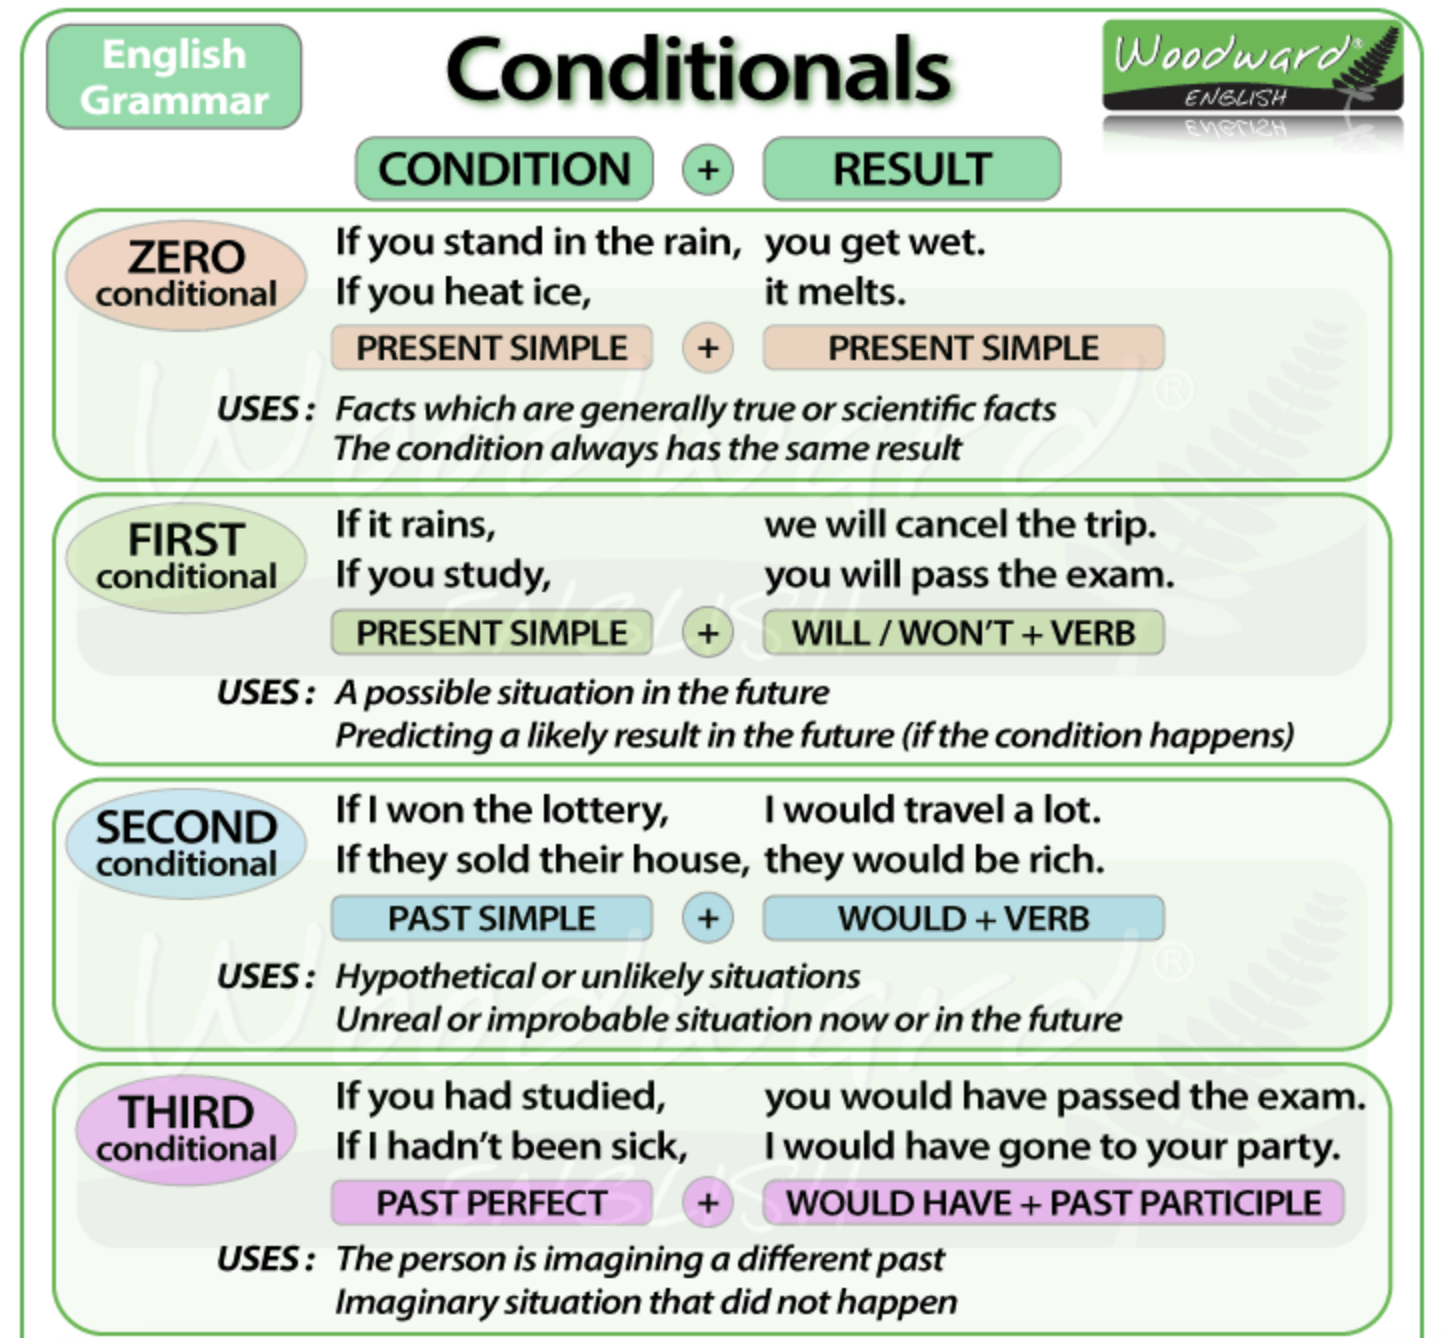 When would you like to come. Английский 0 1 2 3 conditional. Conditionals в английском 0 1 2. Conditionals в английском 2 3. 0-3 Conditional в английском языке.